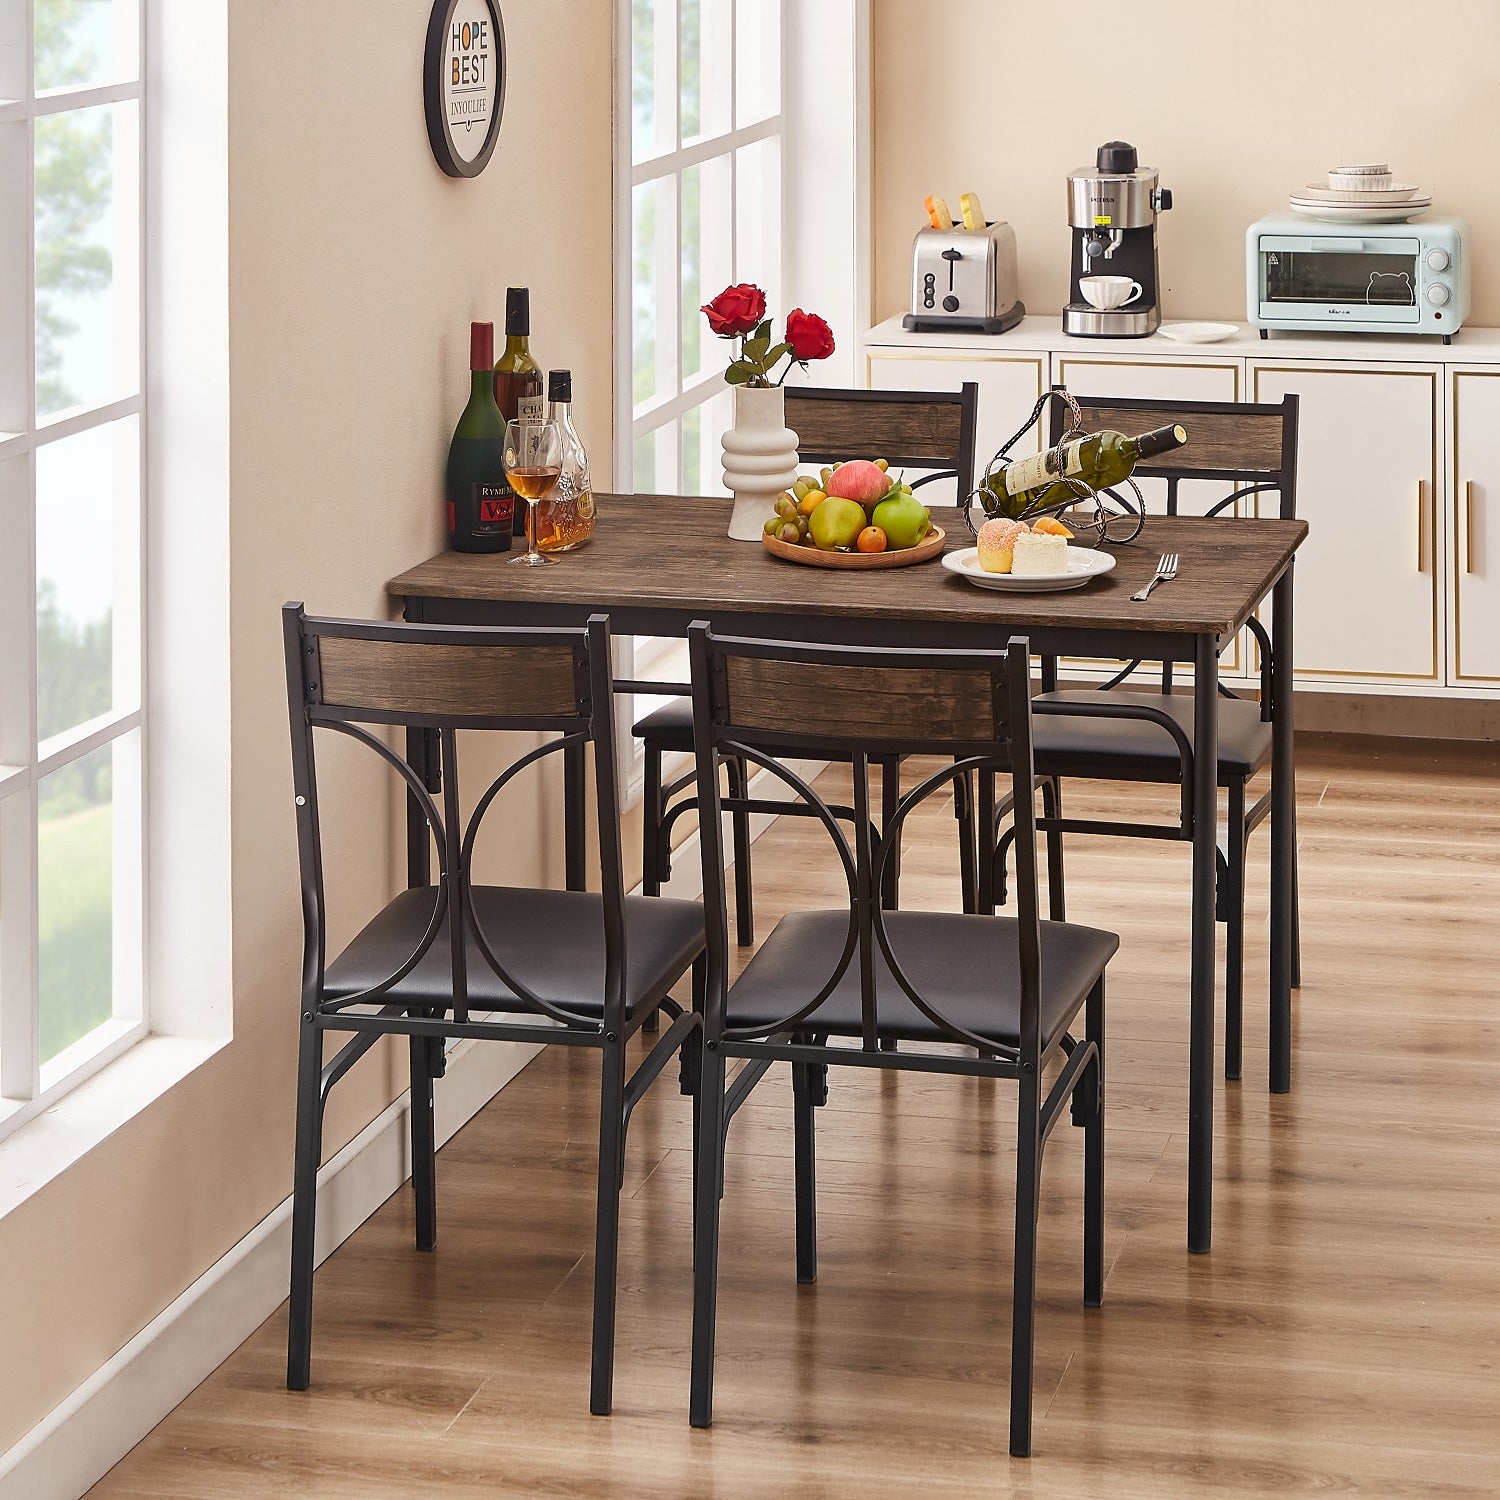 VECELO Industrial Style 5-Piece Modern Rectangular Dining Table Set with 4 Chairs for Dining Room/Kitchen